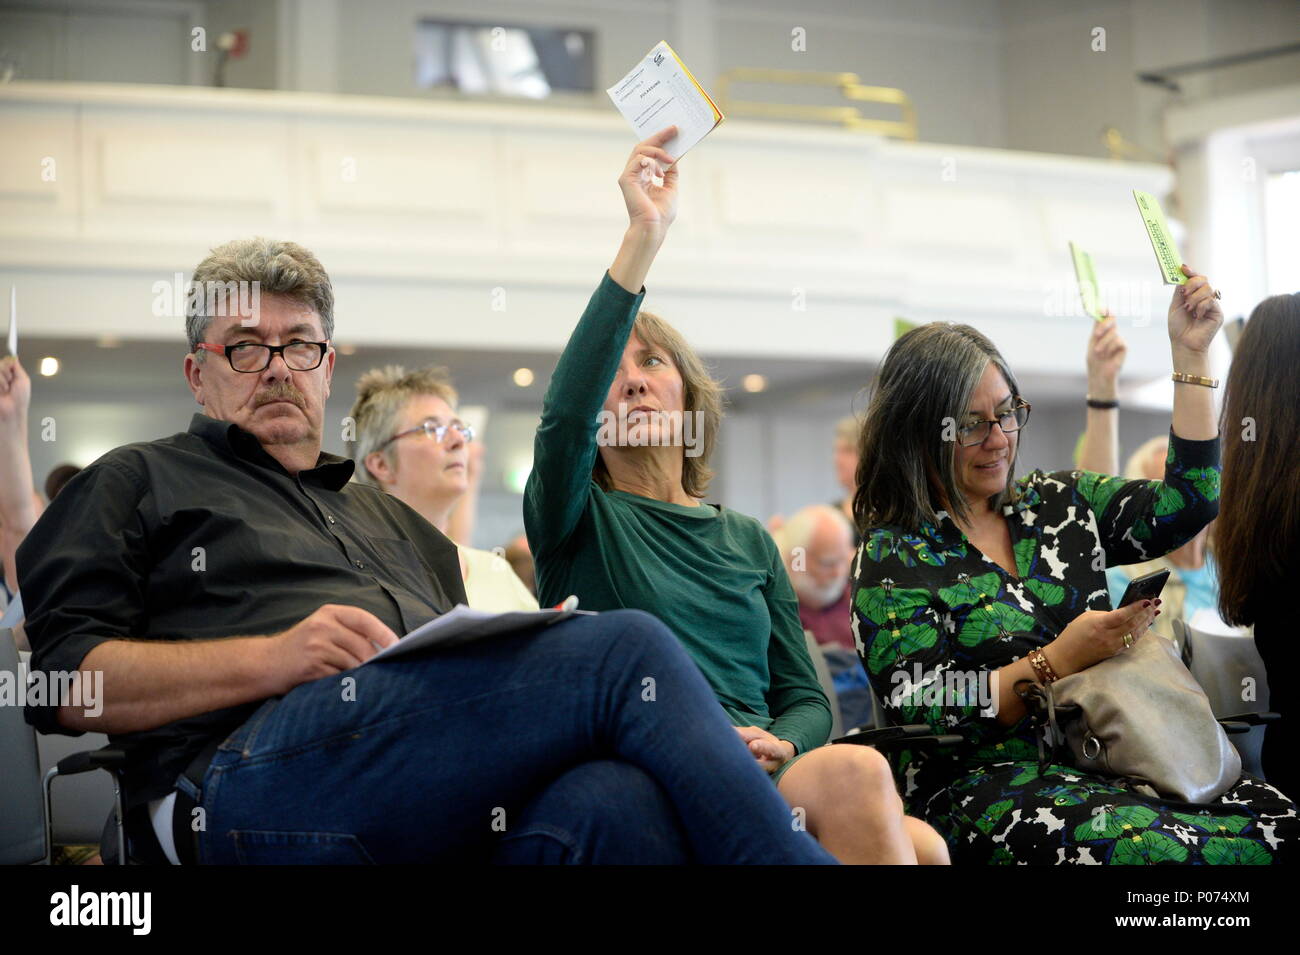 Vienna, Austria. May 9, 2018. National Assembly of the Green Party Vienna. Roadmap to the renewal process of the Green Vienna. Discussion and vote 'modalities leading candidate'. Picture shows Birgit Hebein and Maria Vassilakou, councilor and vice-mayor of the city of Vienna.Credit: Franz Perc / Alamy Live News Stock Photo